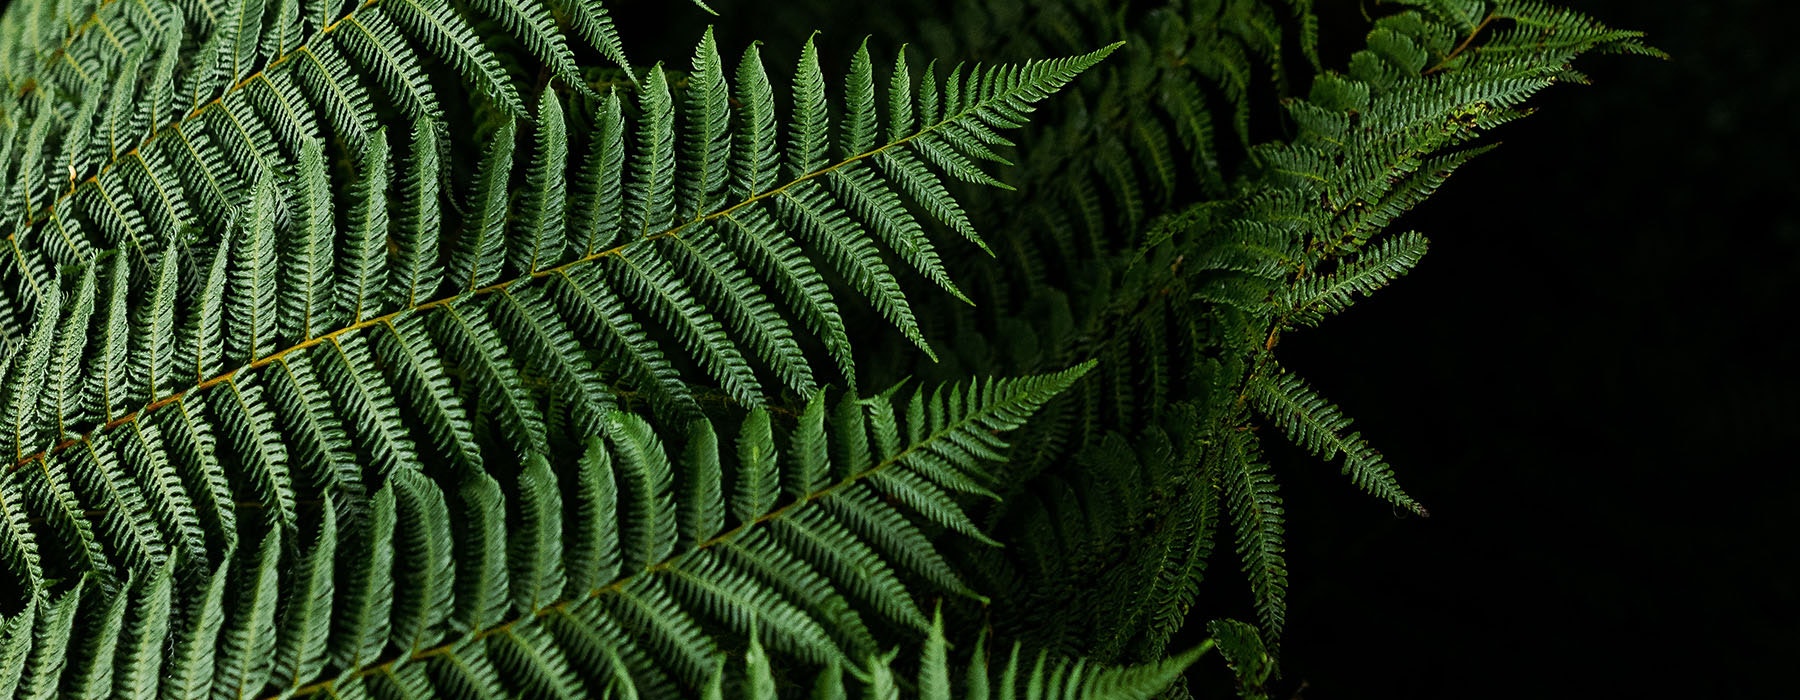 Close up of green fern